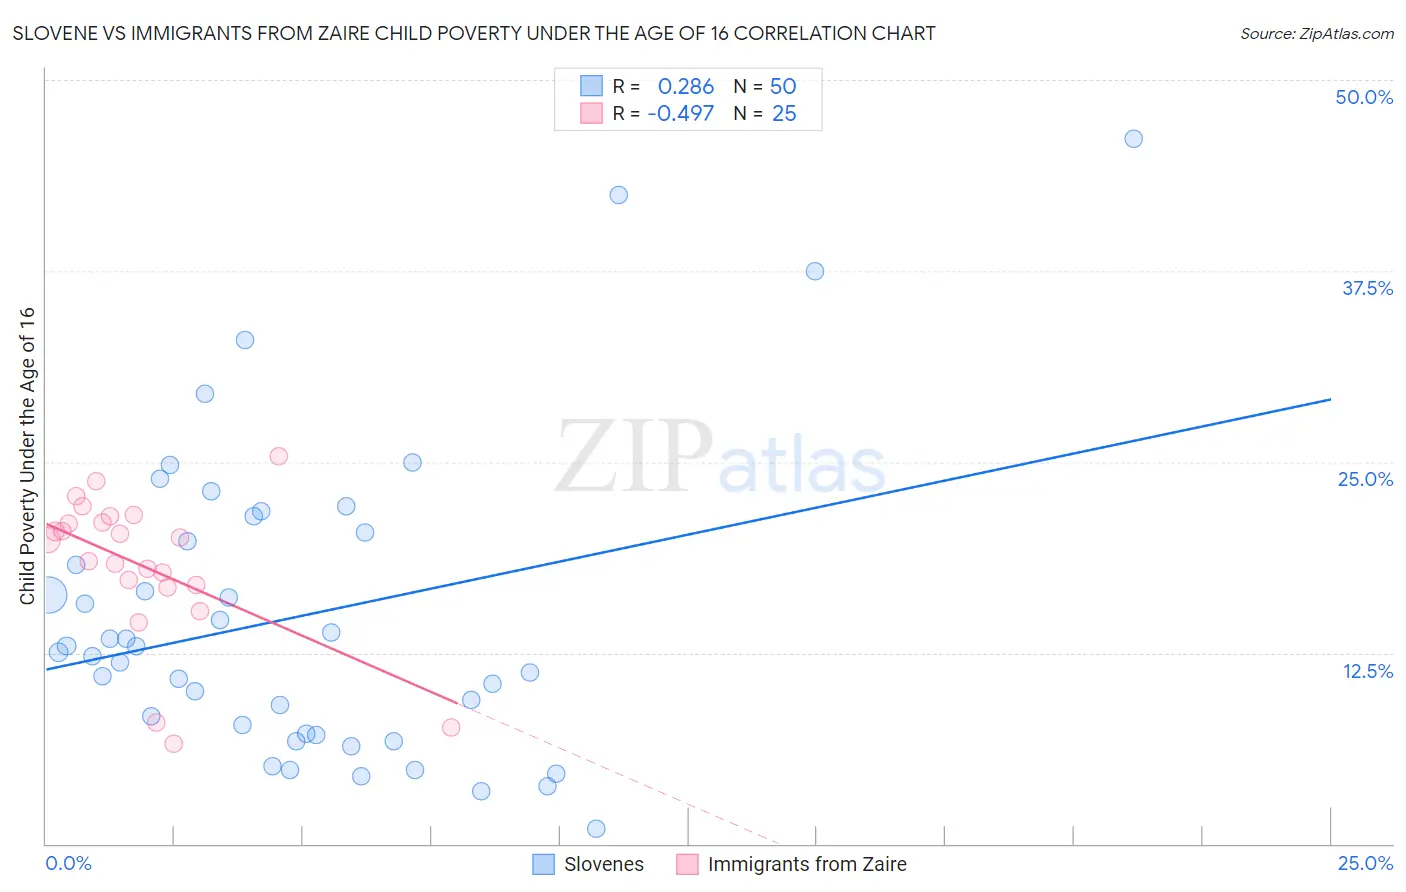 Slovene vs Immigrants from Zaire Child Poverty Under the Age of 16